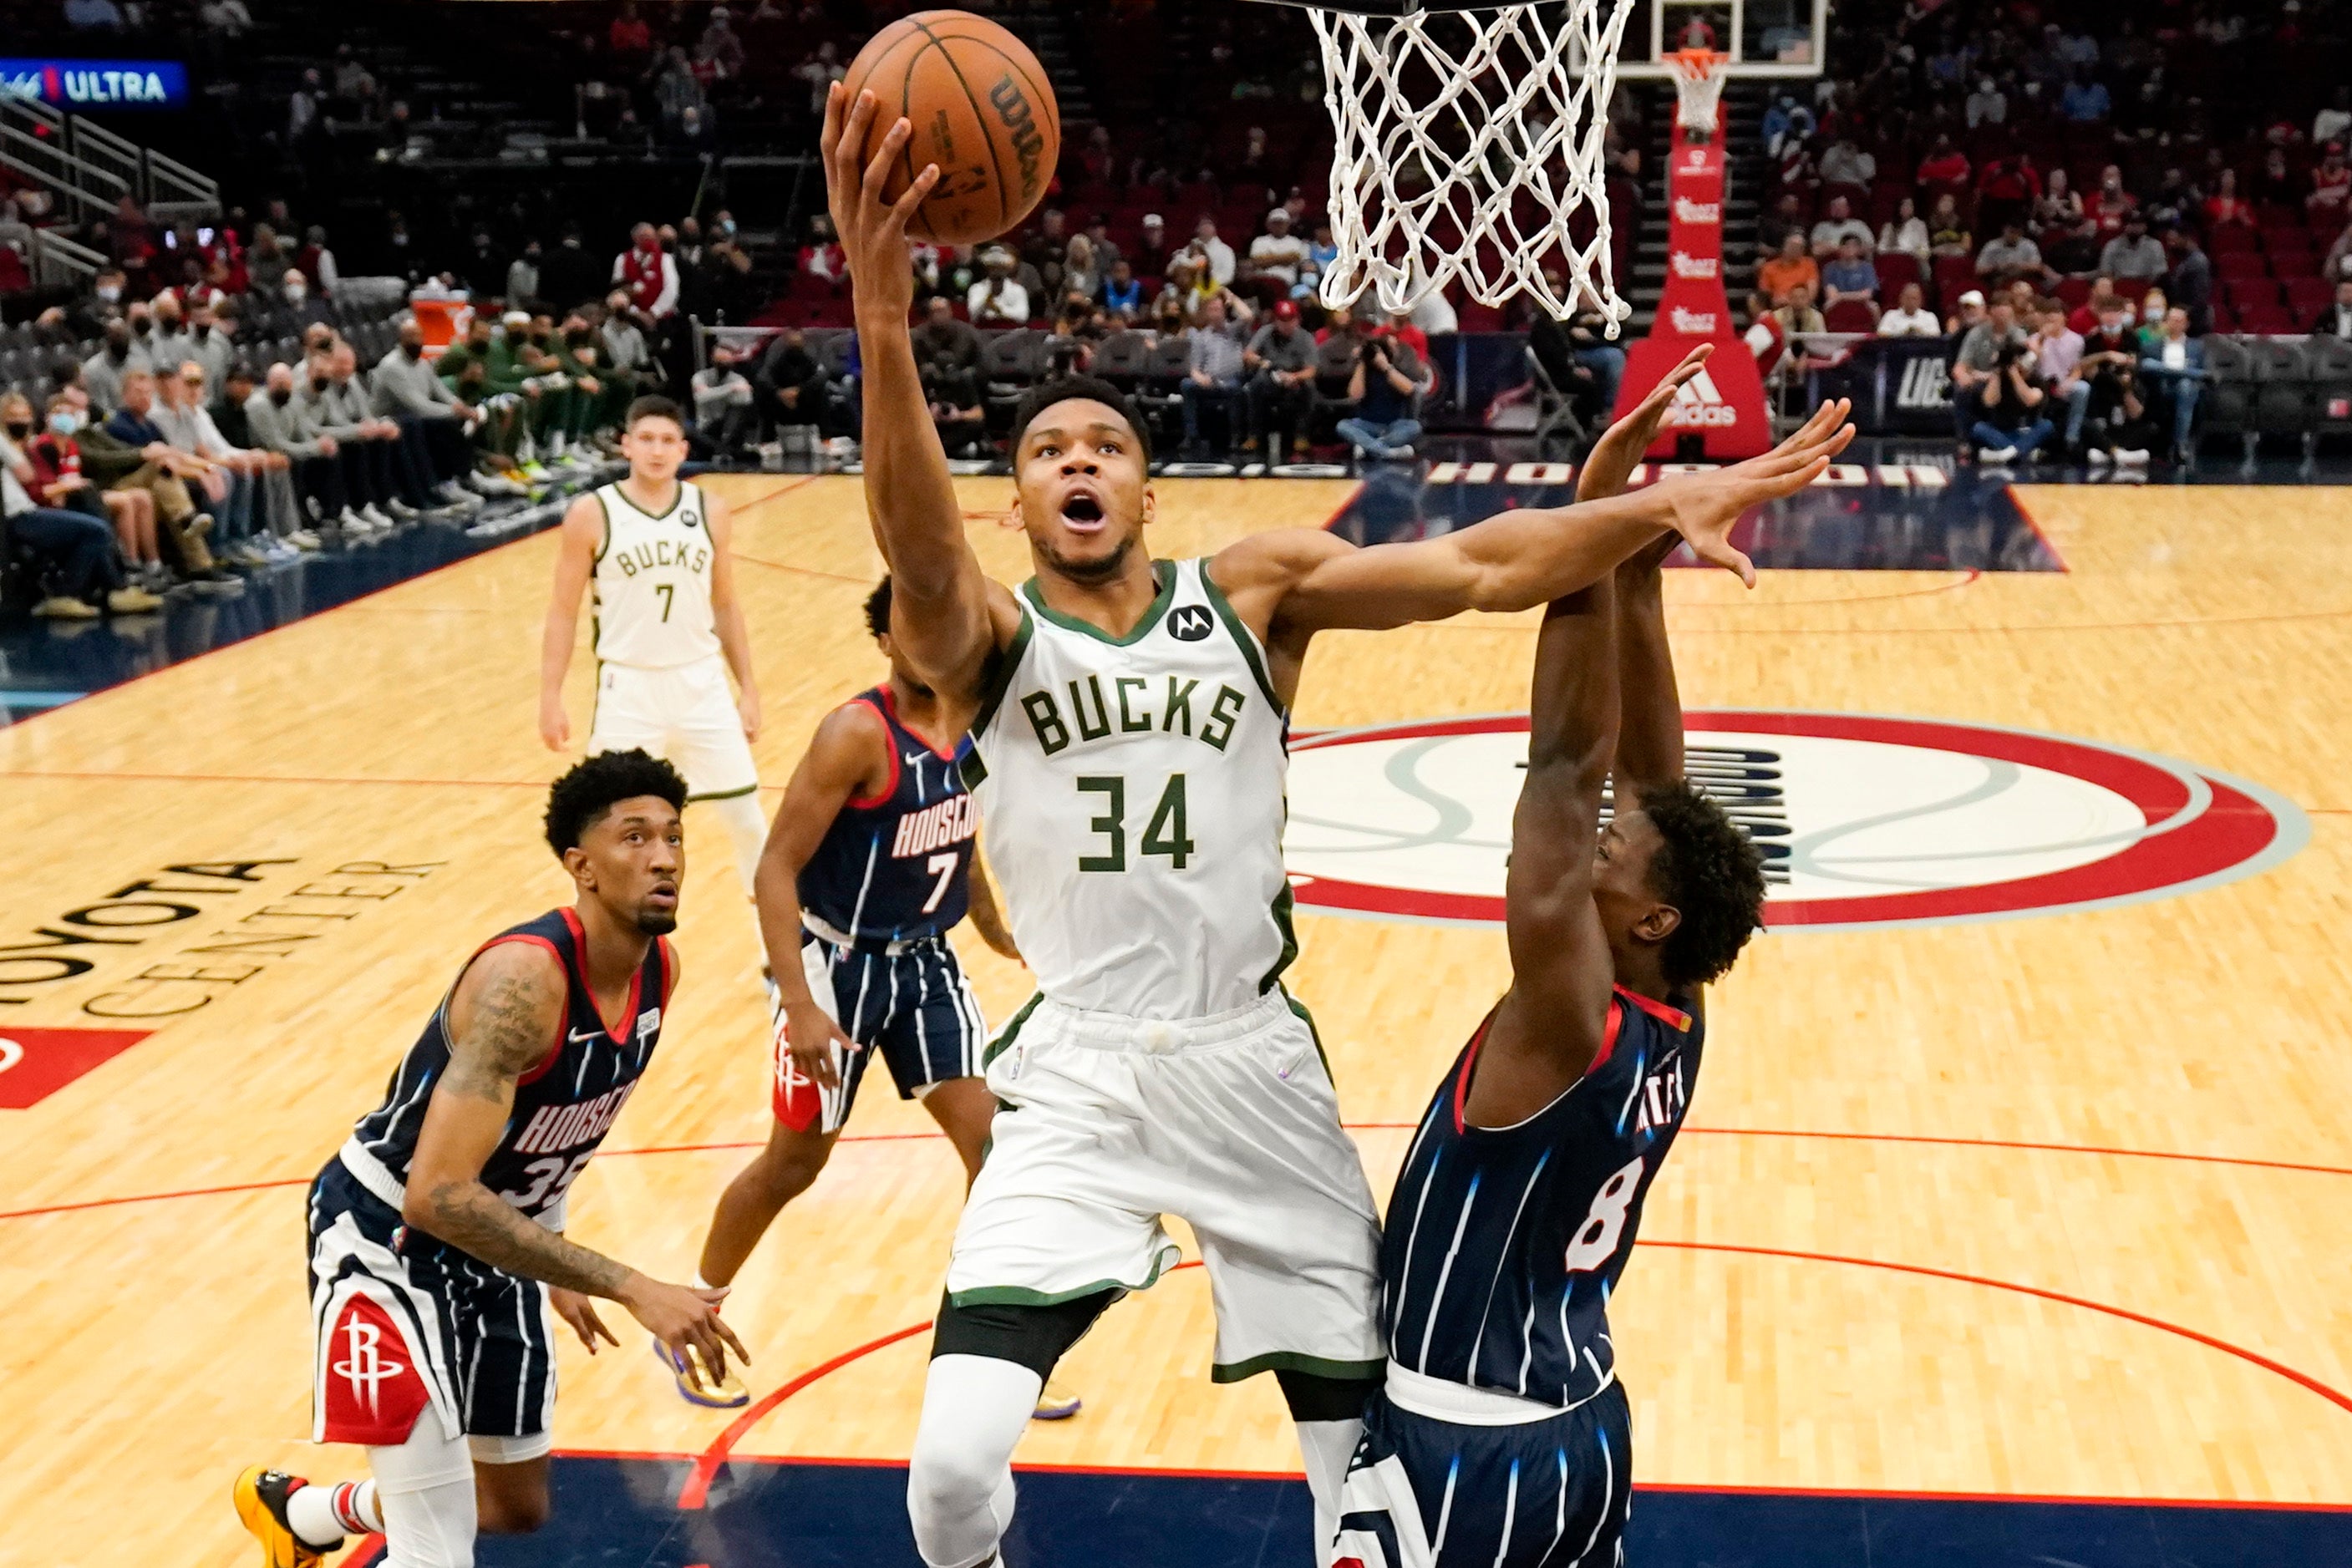 Bucks beat Pacers to put NBA on notice with 7 straight wins